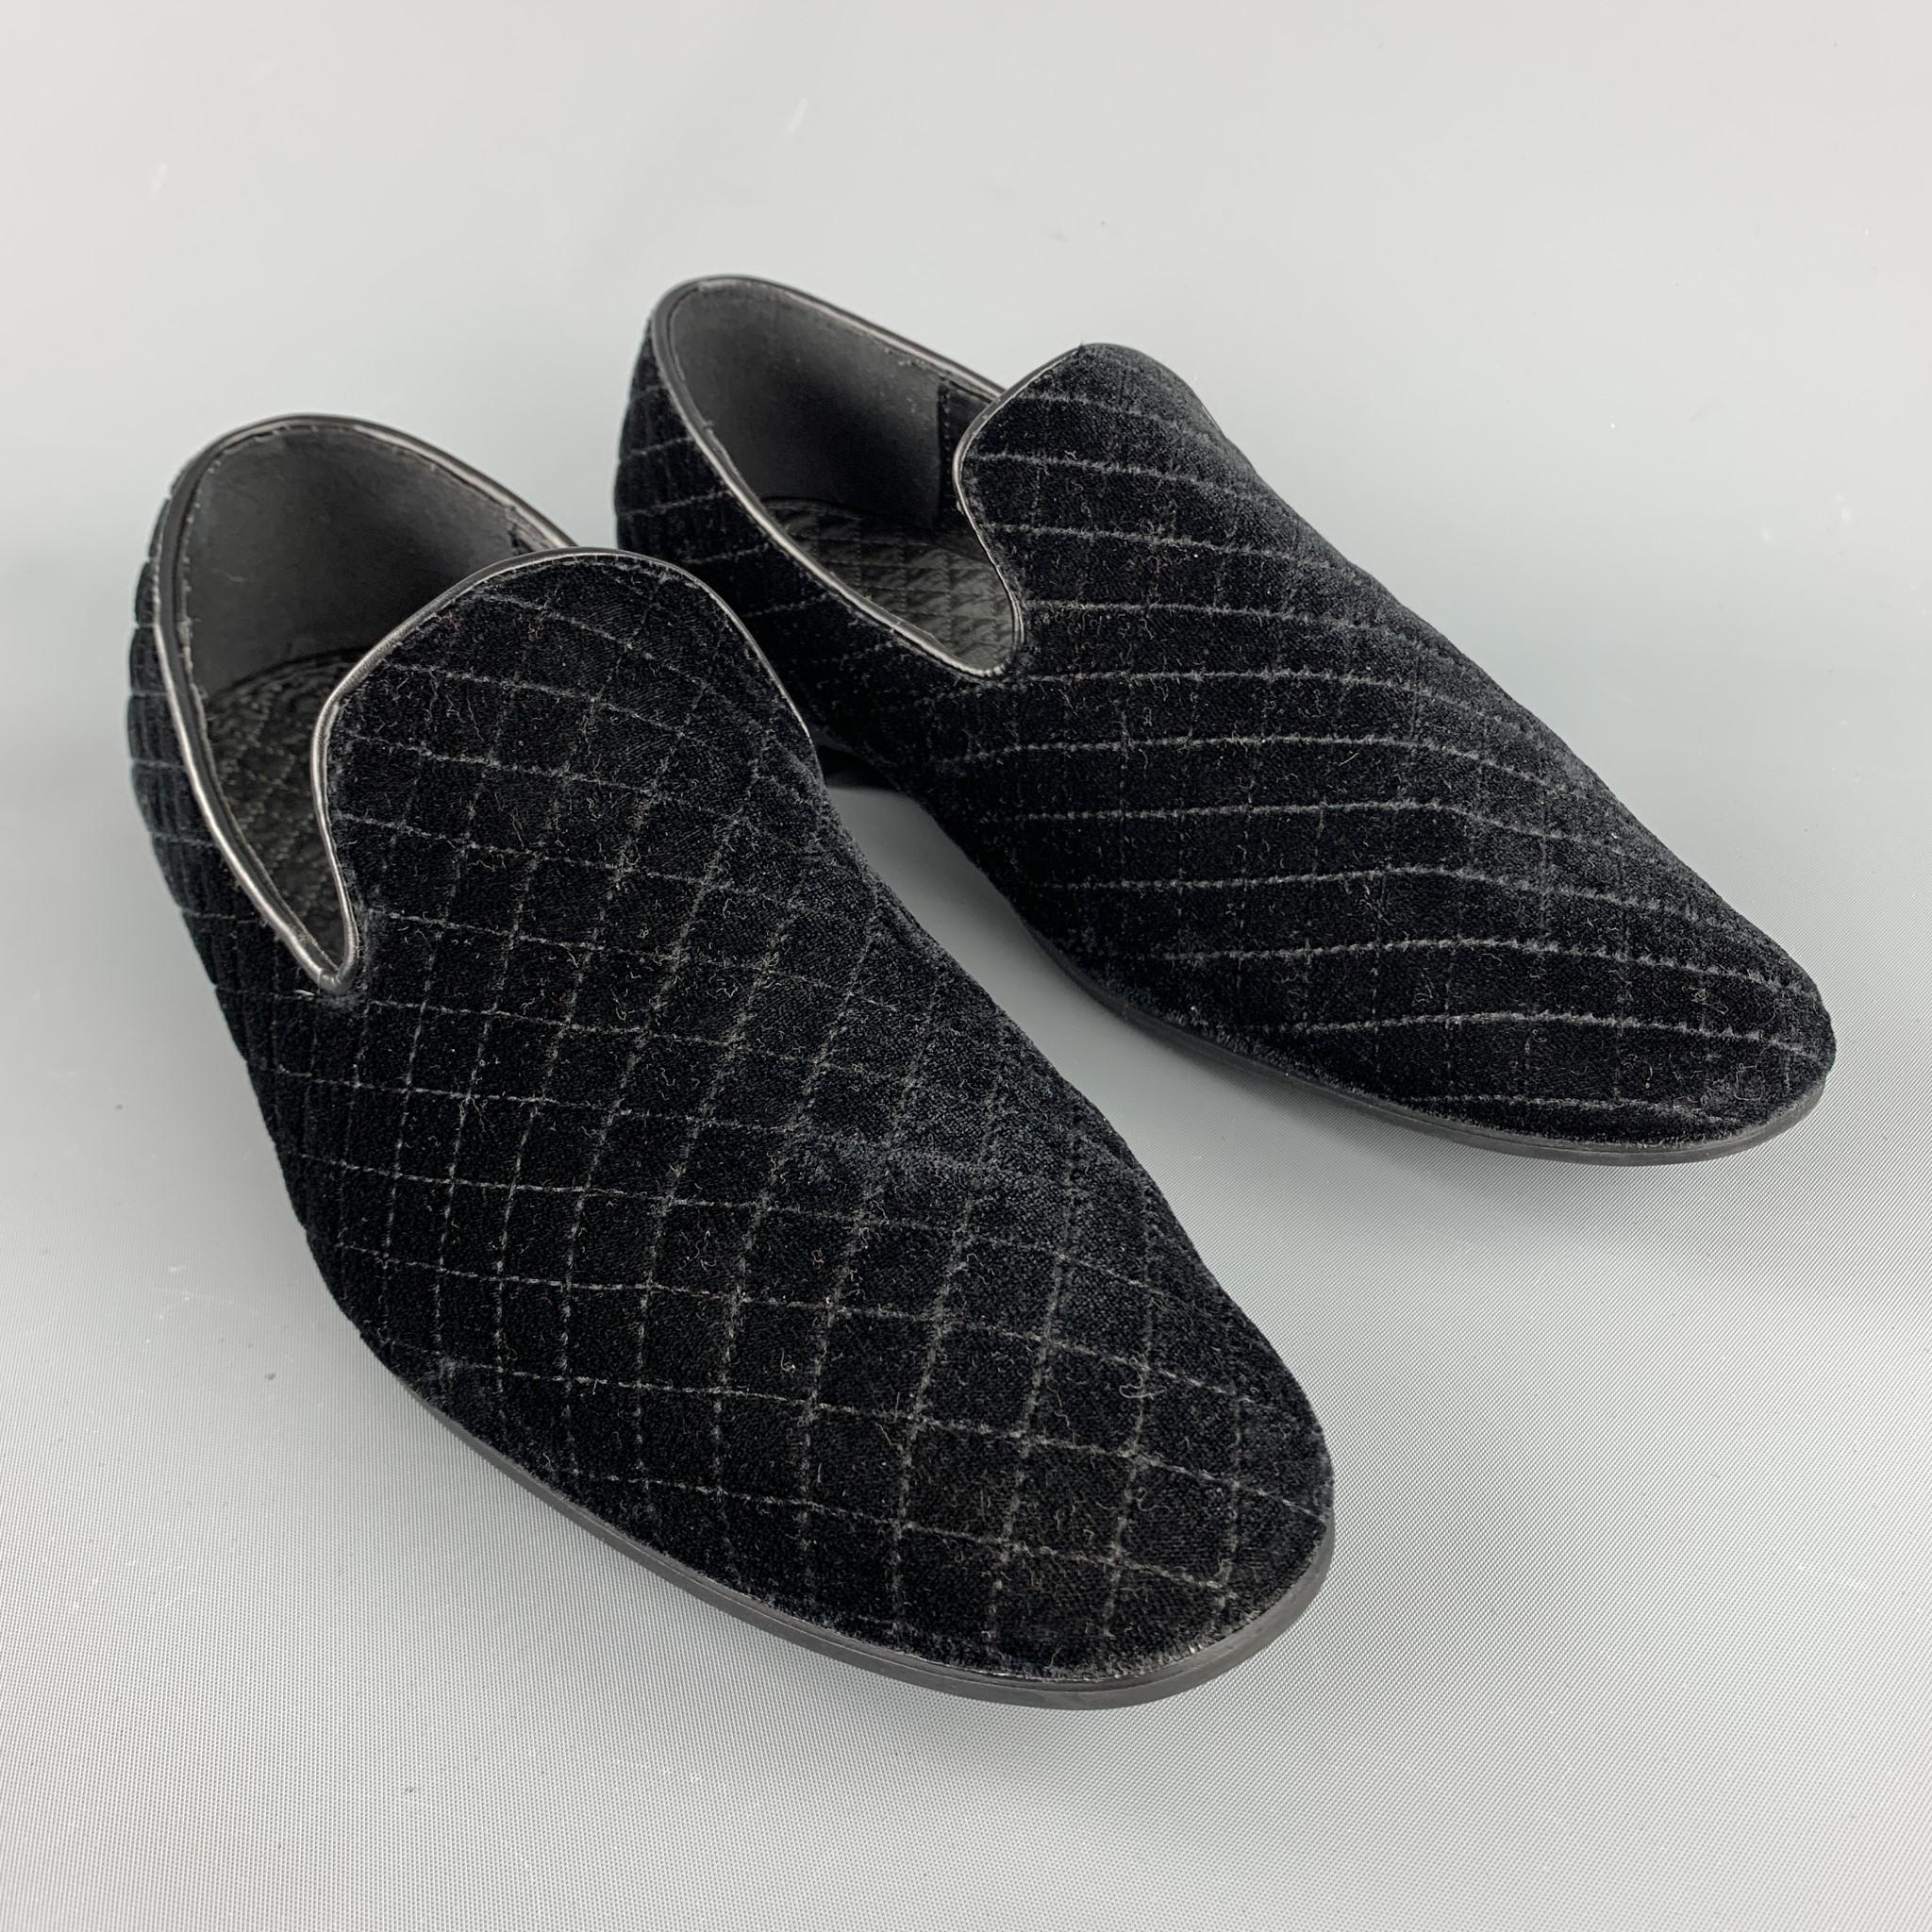 VINTAGE slip on loafers comes in a quilted black velvet material, with a quilted insole. 

Excellent Pre-Owned Condition.
Marked: no size

Outsole: 11.5 x 4 in.